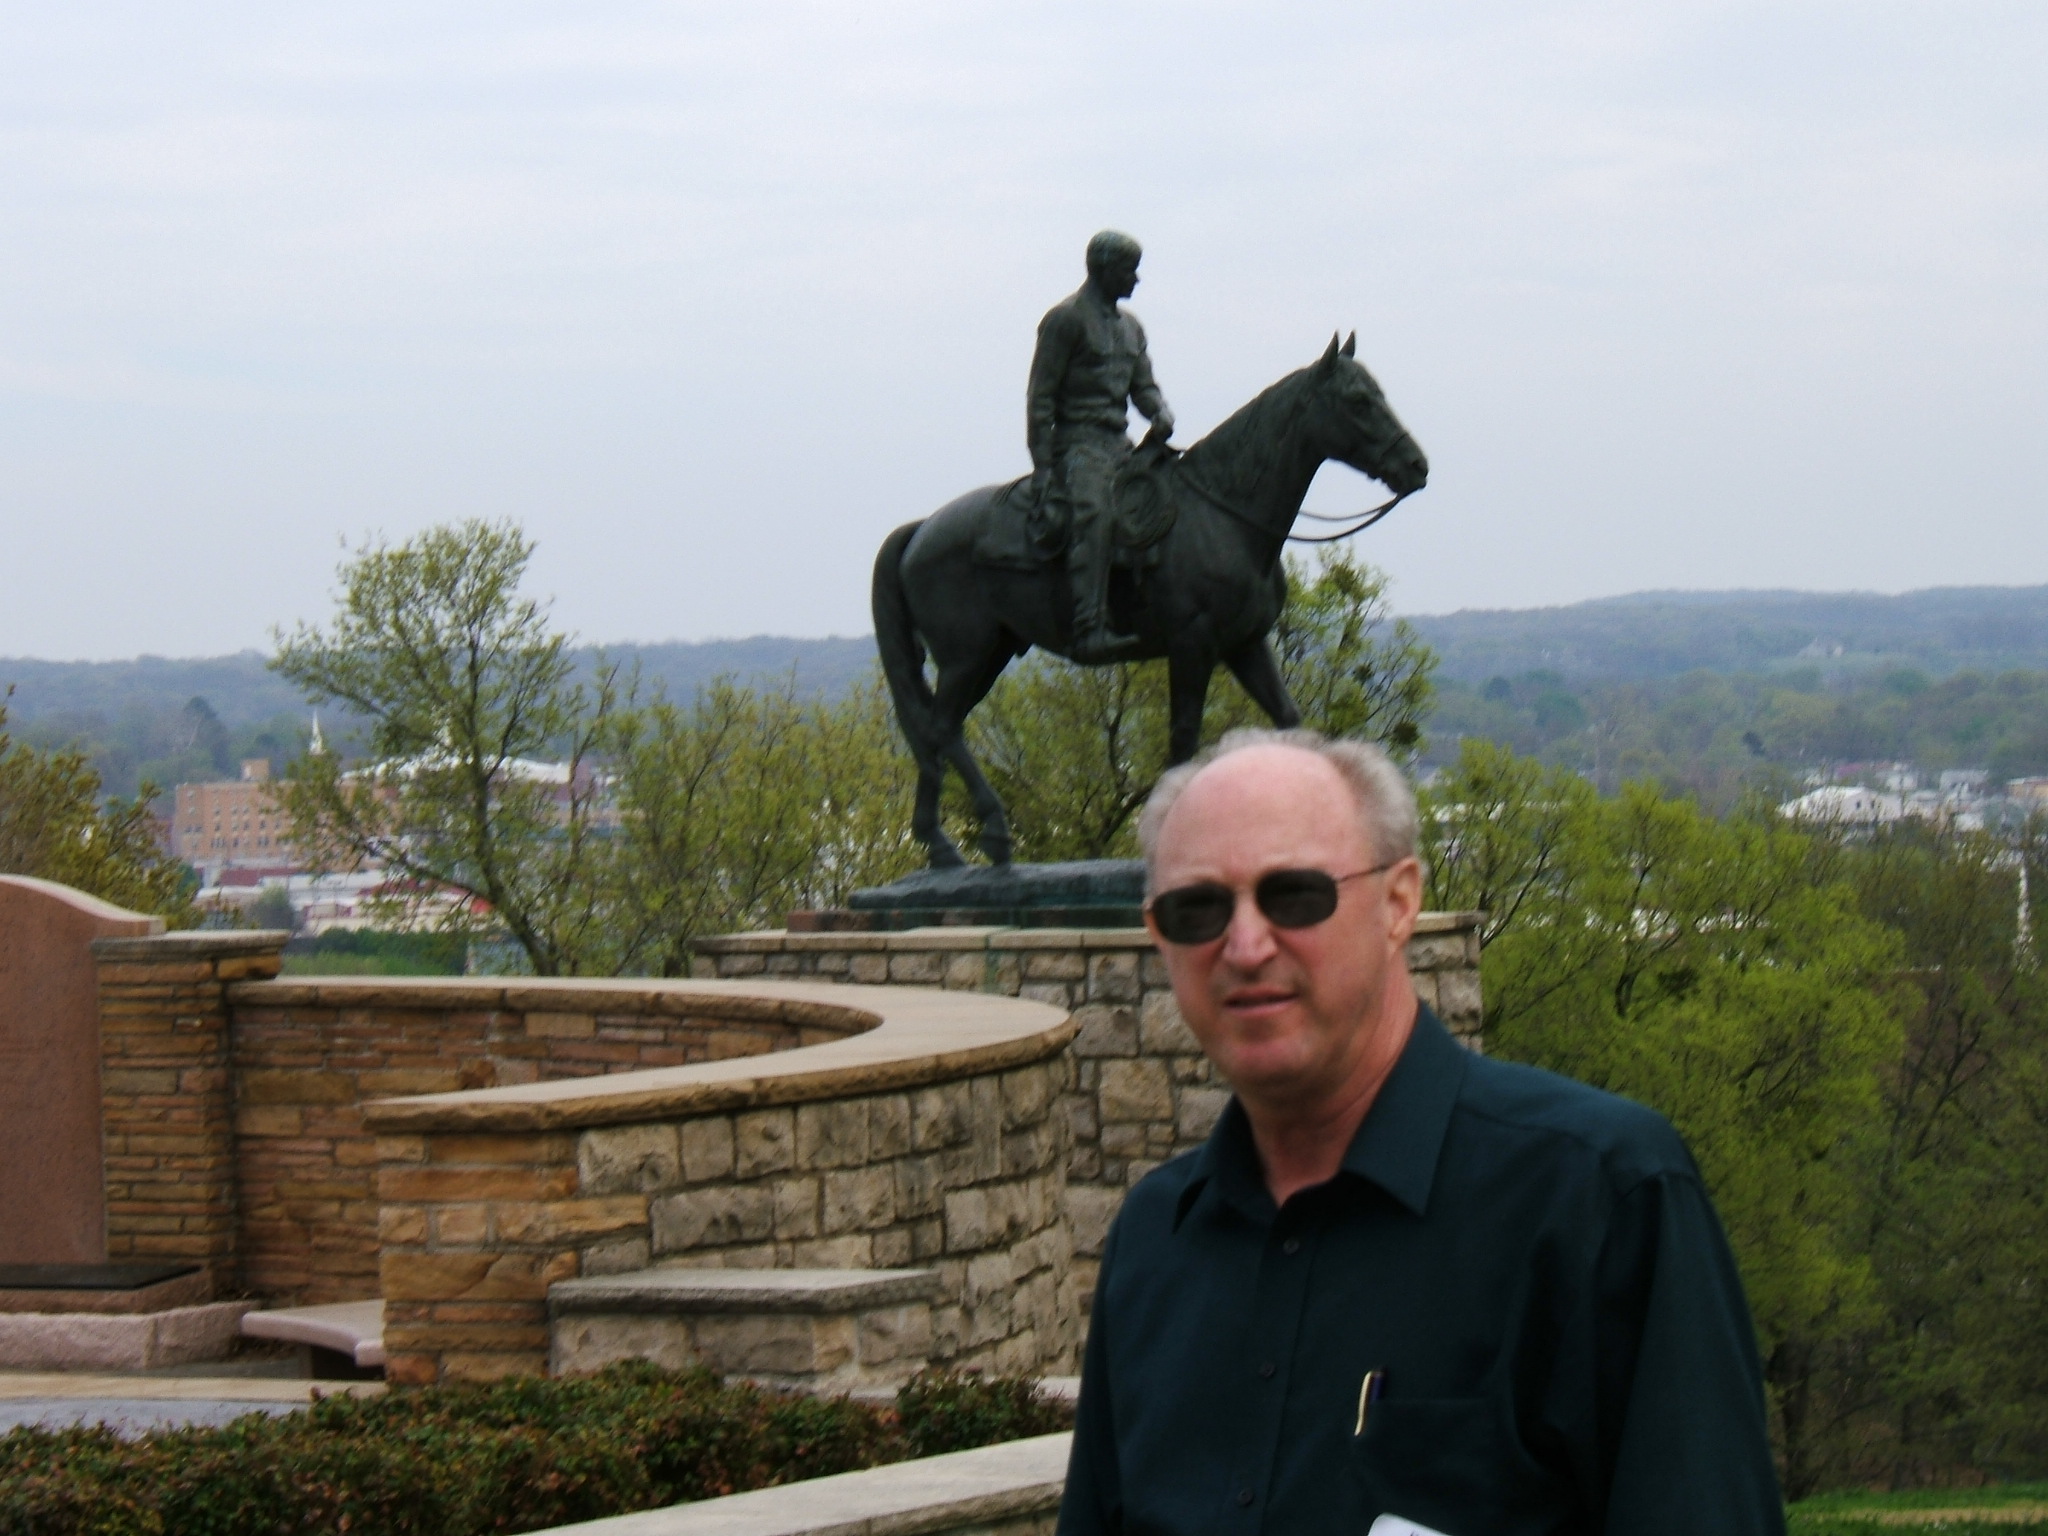 Don in front of Will Rogers statue on horse